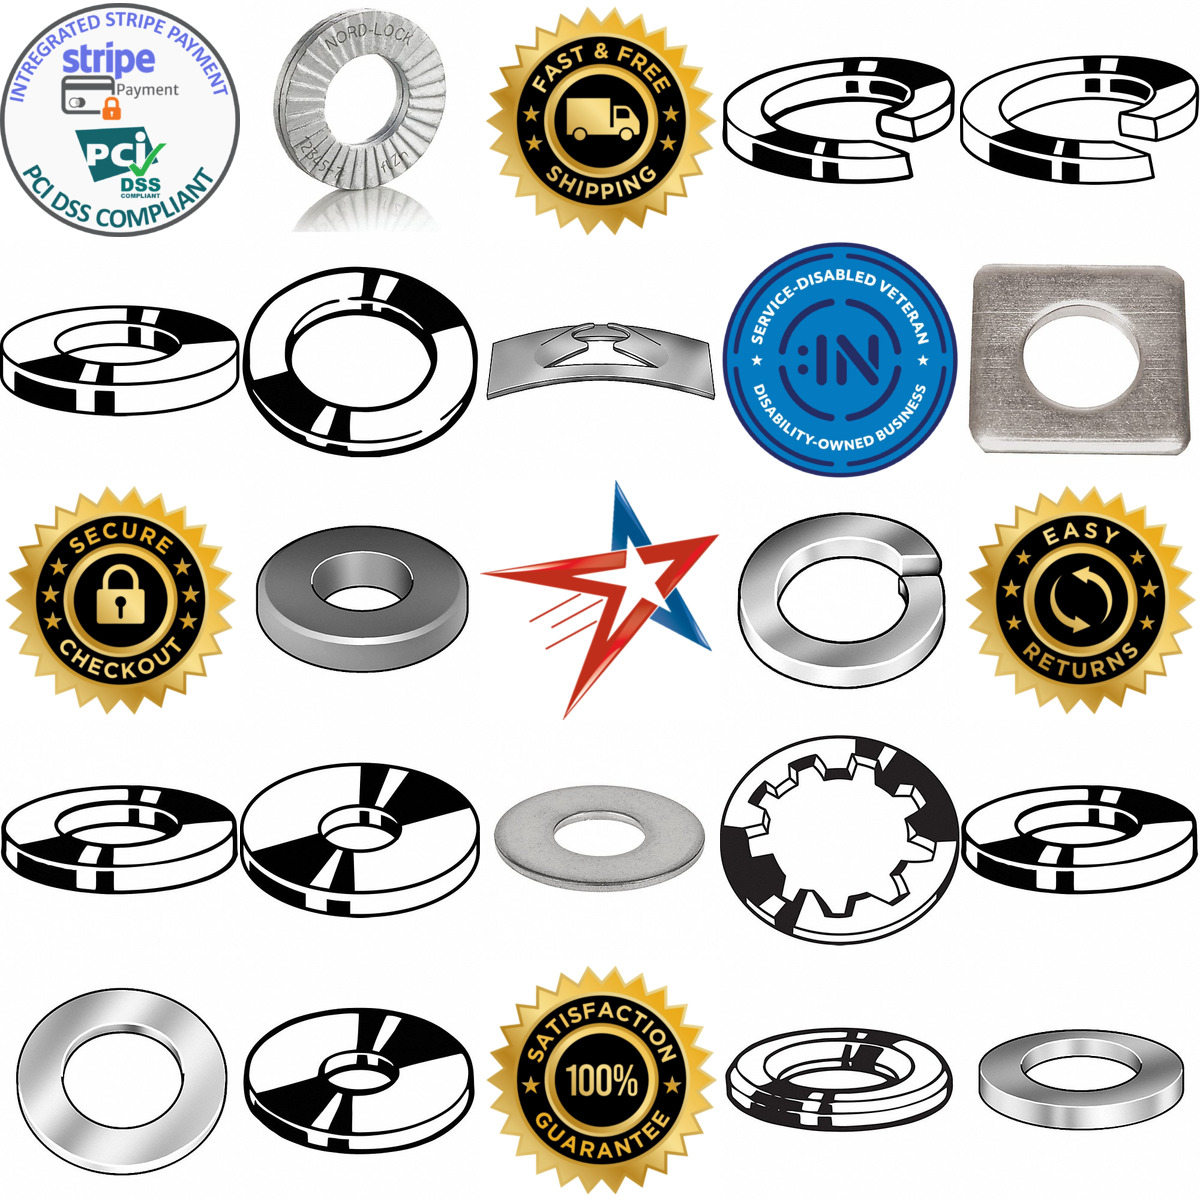 A selection of Washers products on GoVets